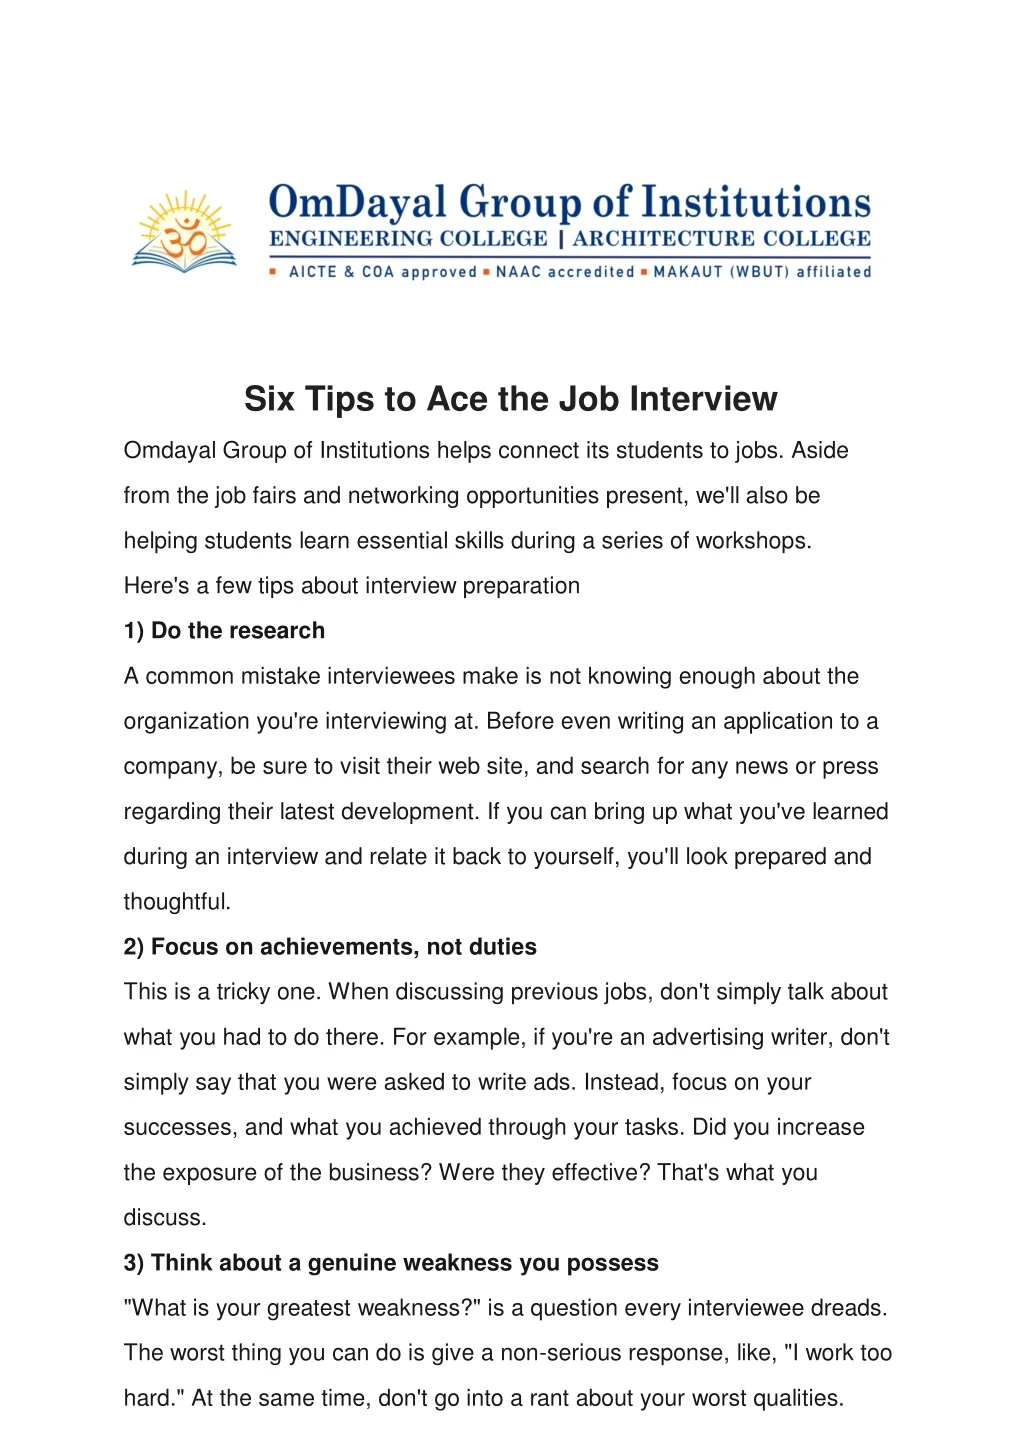 six tips to ace the job interview